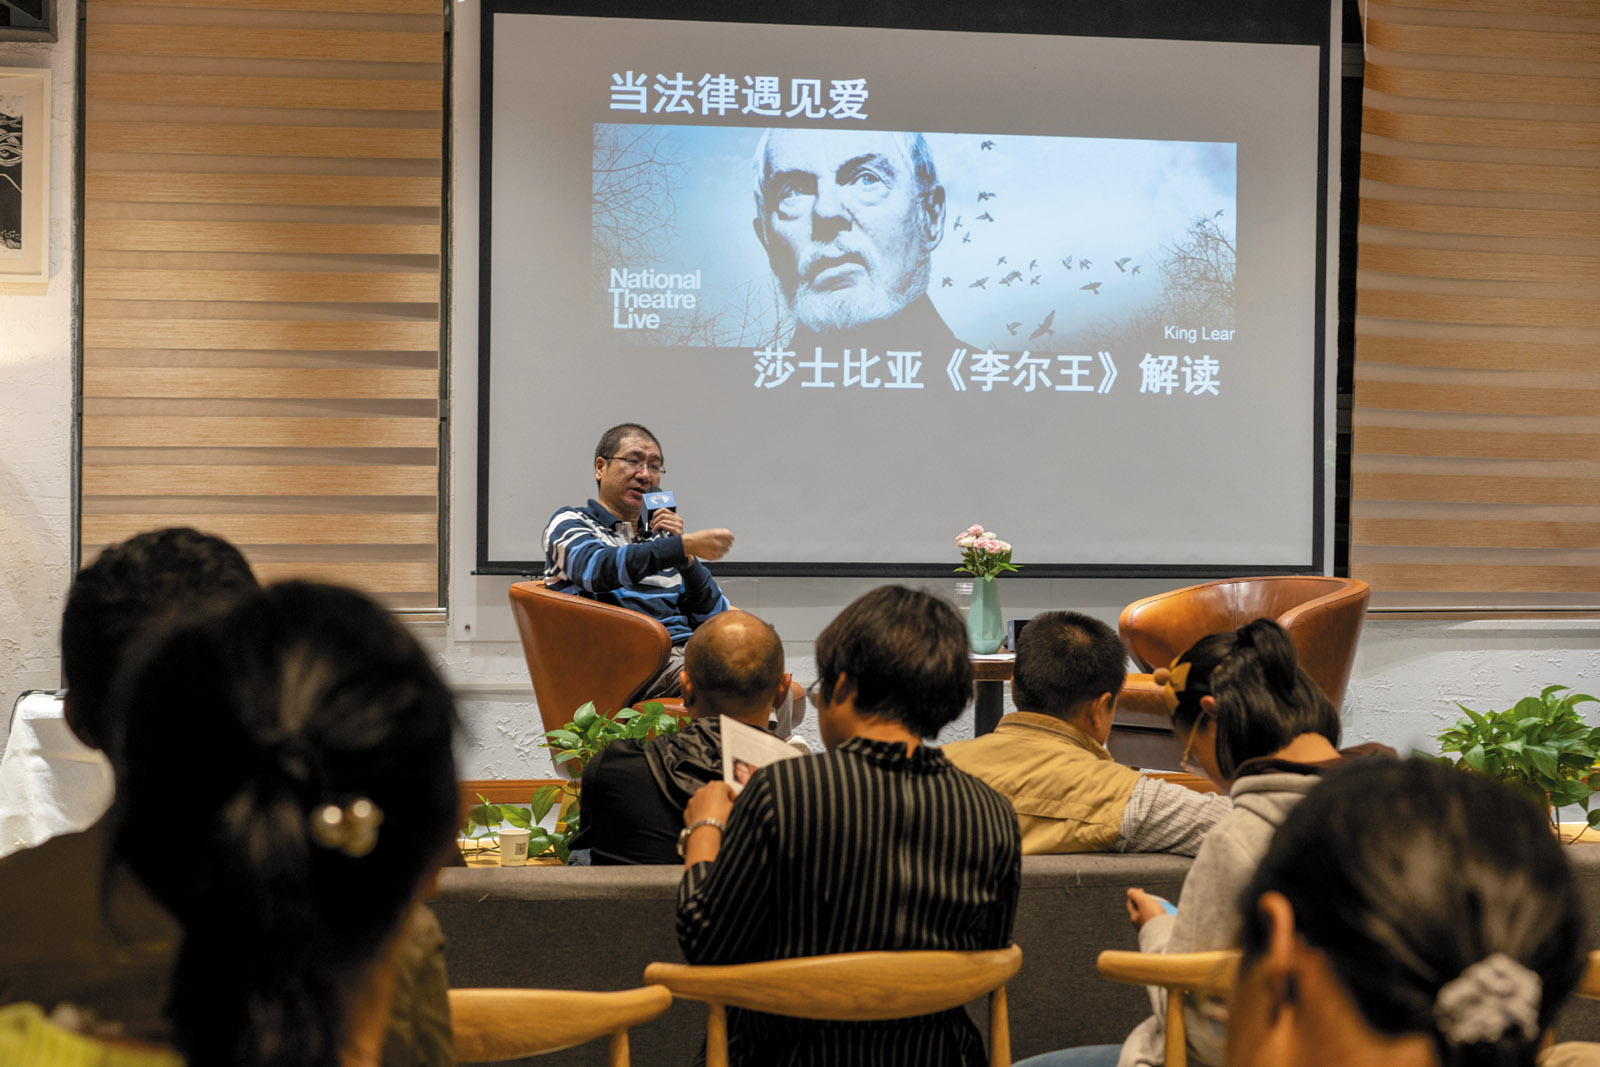 Chen Hongguo lecturing on King Lear, China, 2018